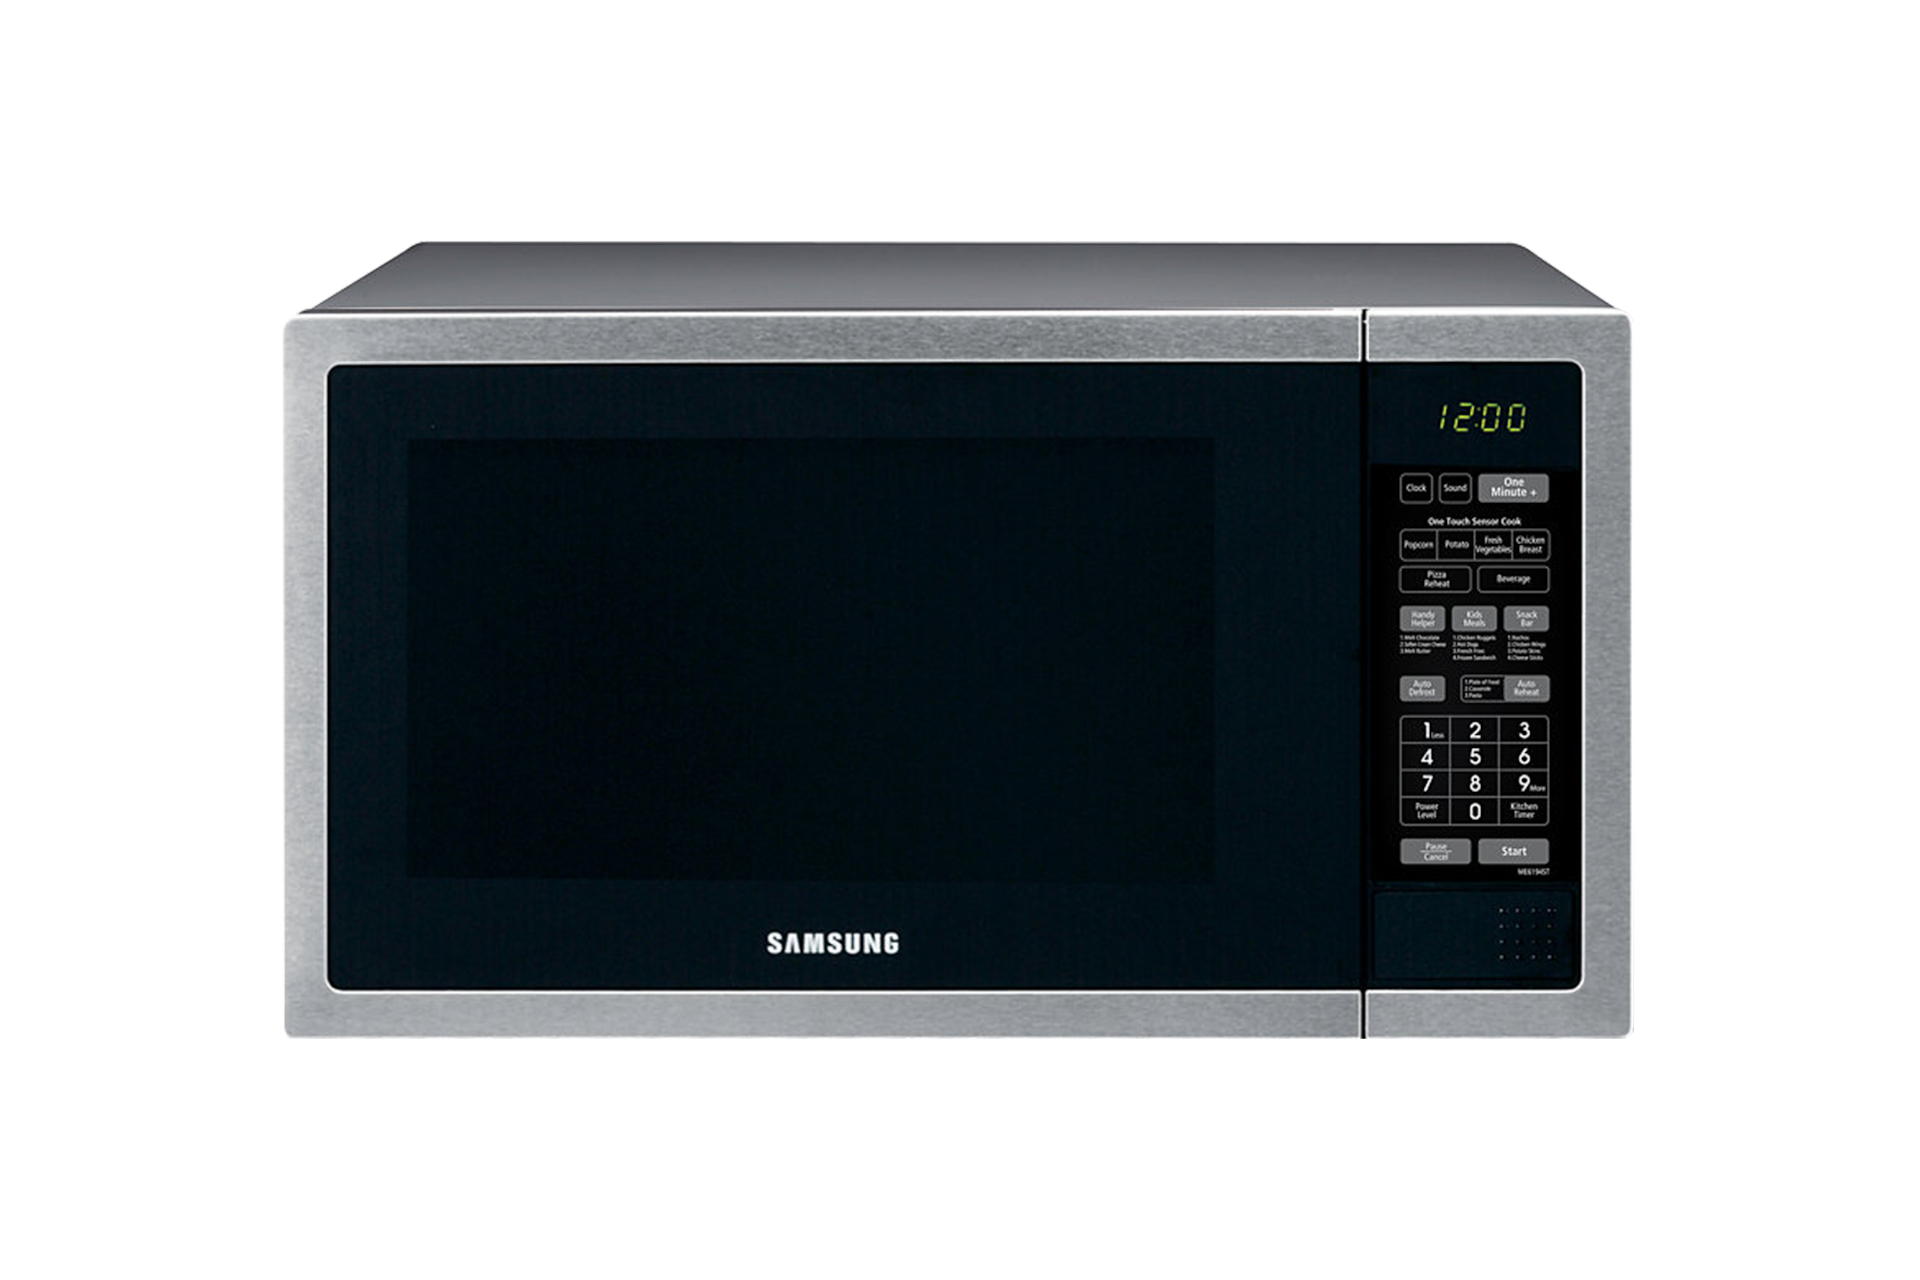 Samsung 55L, Electronic Solo, Microwave Oven, with Sensor Cook Technology, ME6194ST in Silver